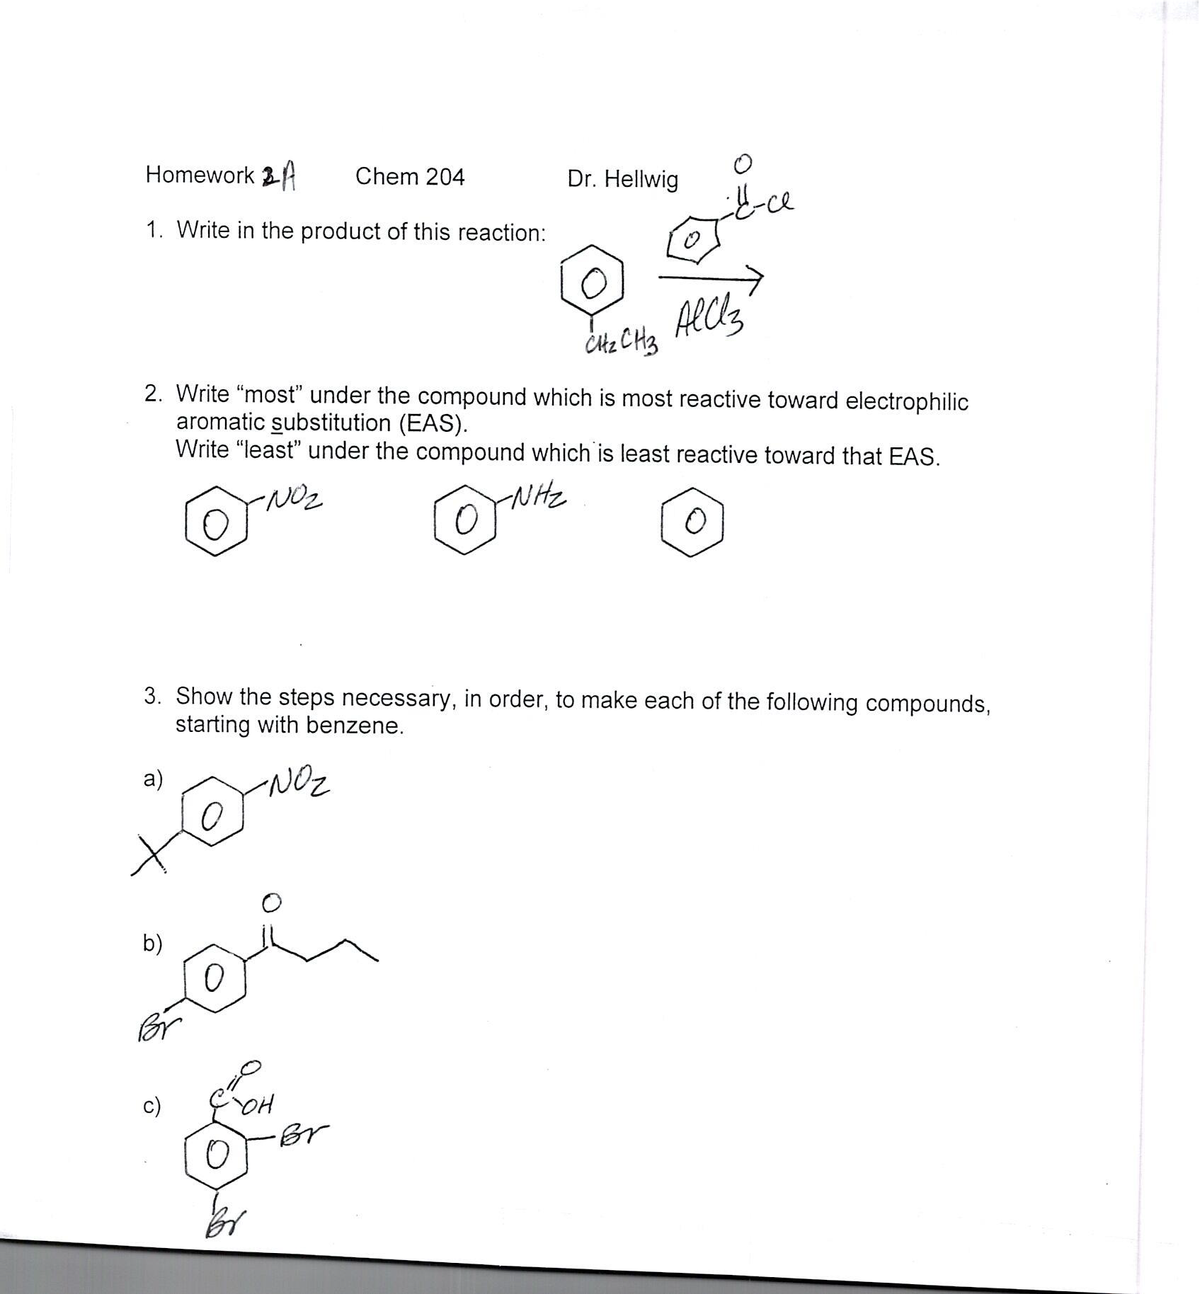 Homework 3
Chem 204
Dr. Hellwig
1. Write in the product of this reaction:
->
Alcls
Citz CH3
2. Write “most" under the compound which is most reactive toward electrophilic
aromatic substitution (EAS).
Write "least" under the compound which is least reactive toward that EAS.
NON-
NHz
3. Show the steps necessary, in order, to make each of the following compounds,
starting with benzene.
a)
NOz
b)
Br
OH
